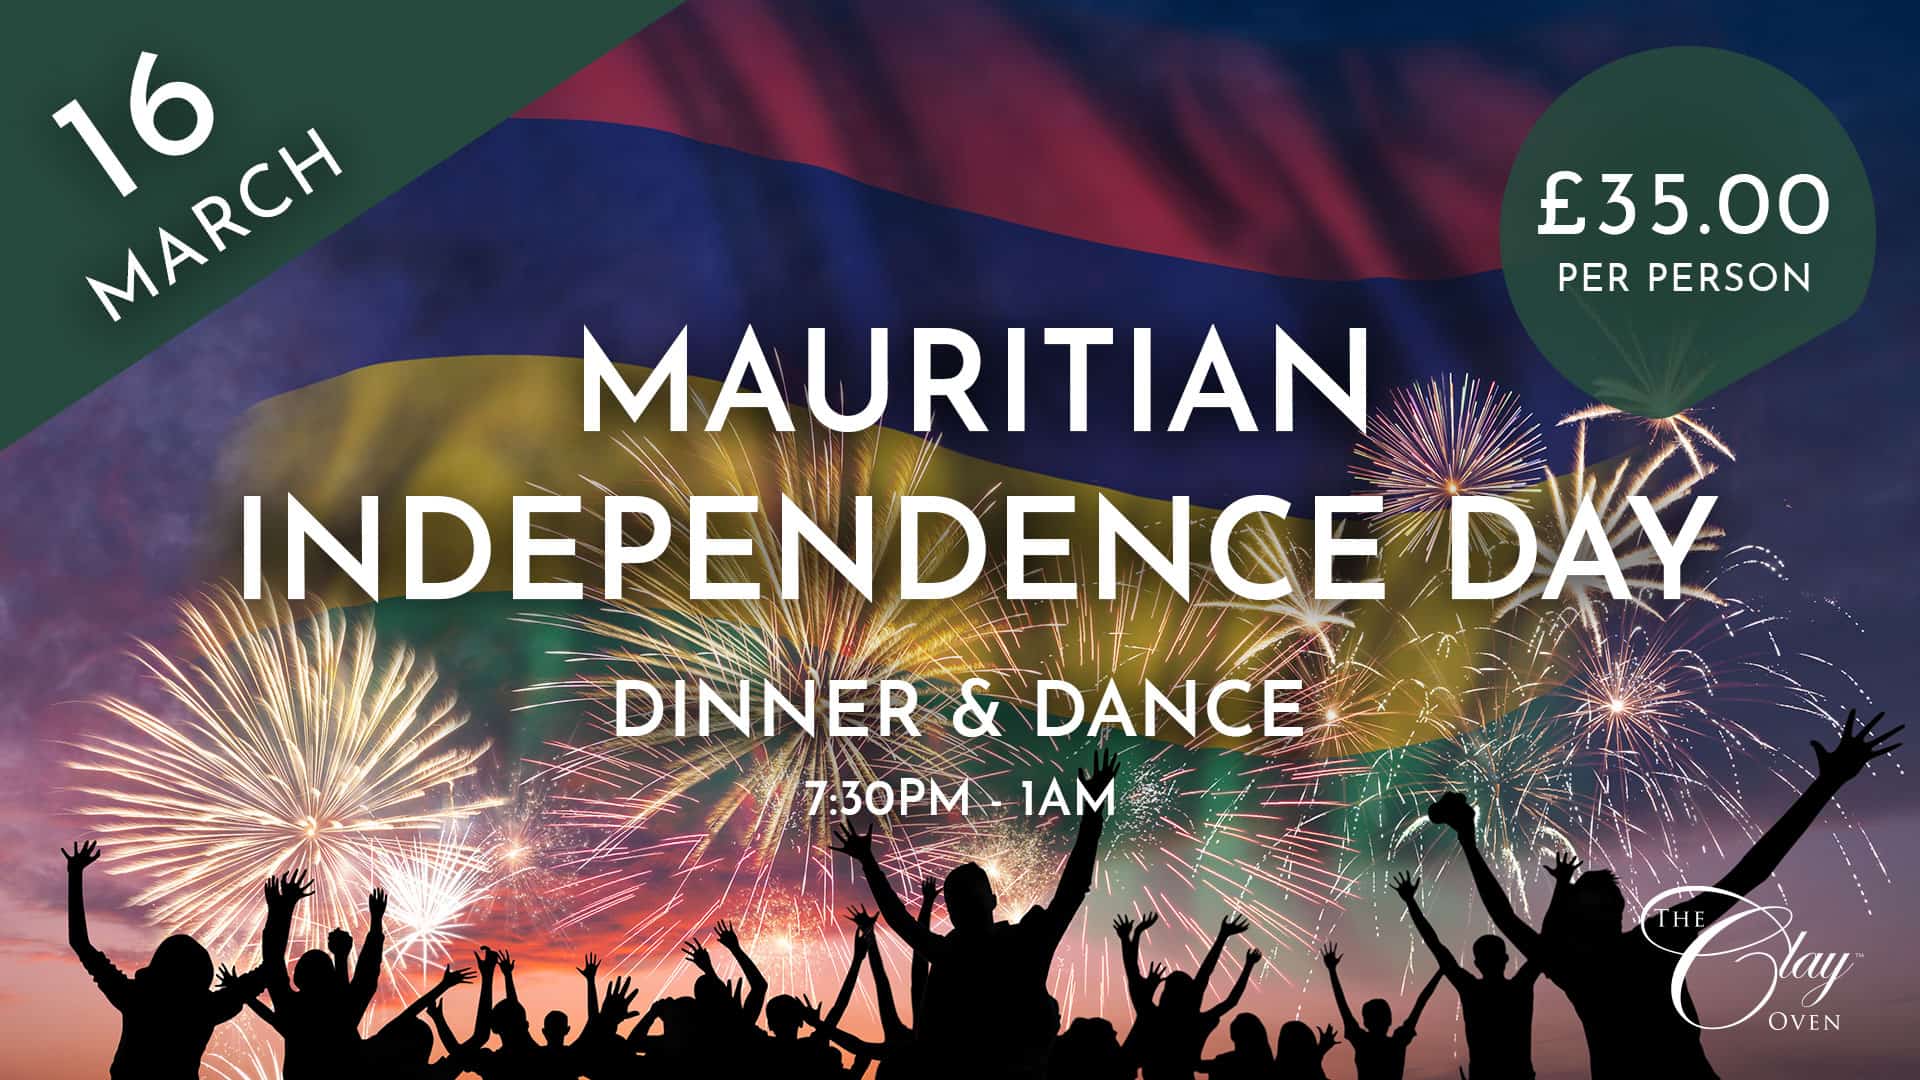 Mauritian Independence Day celebration with a dinner & dance.